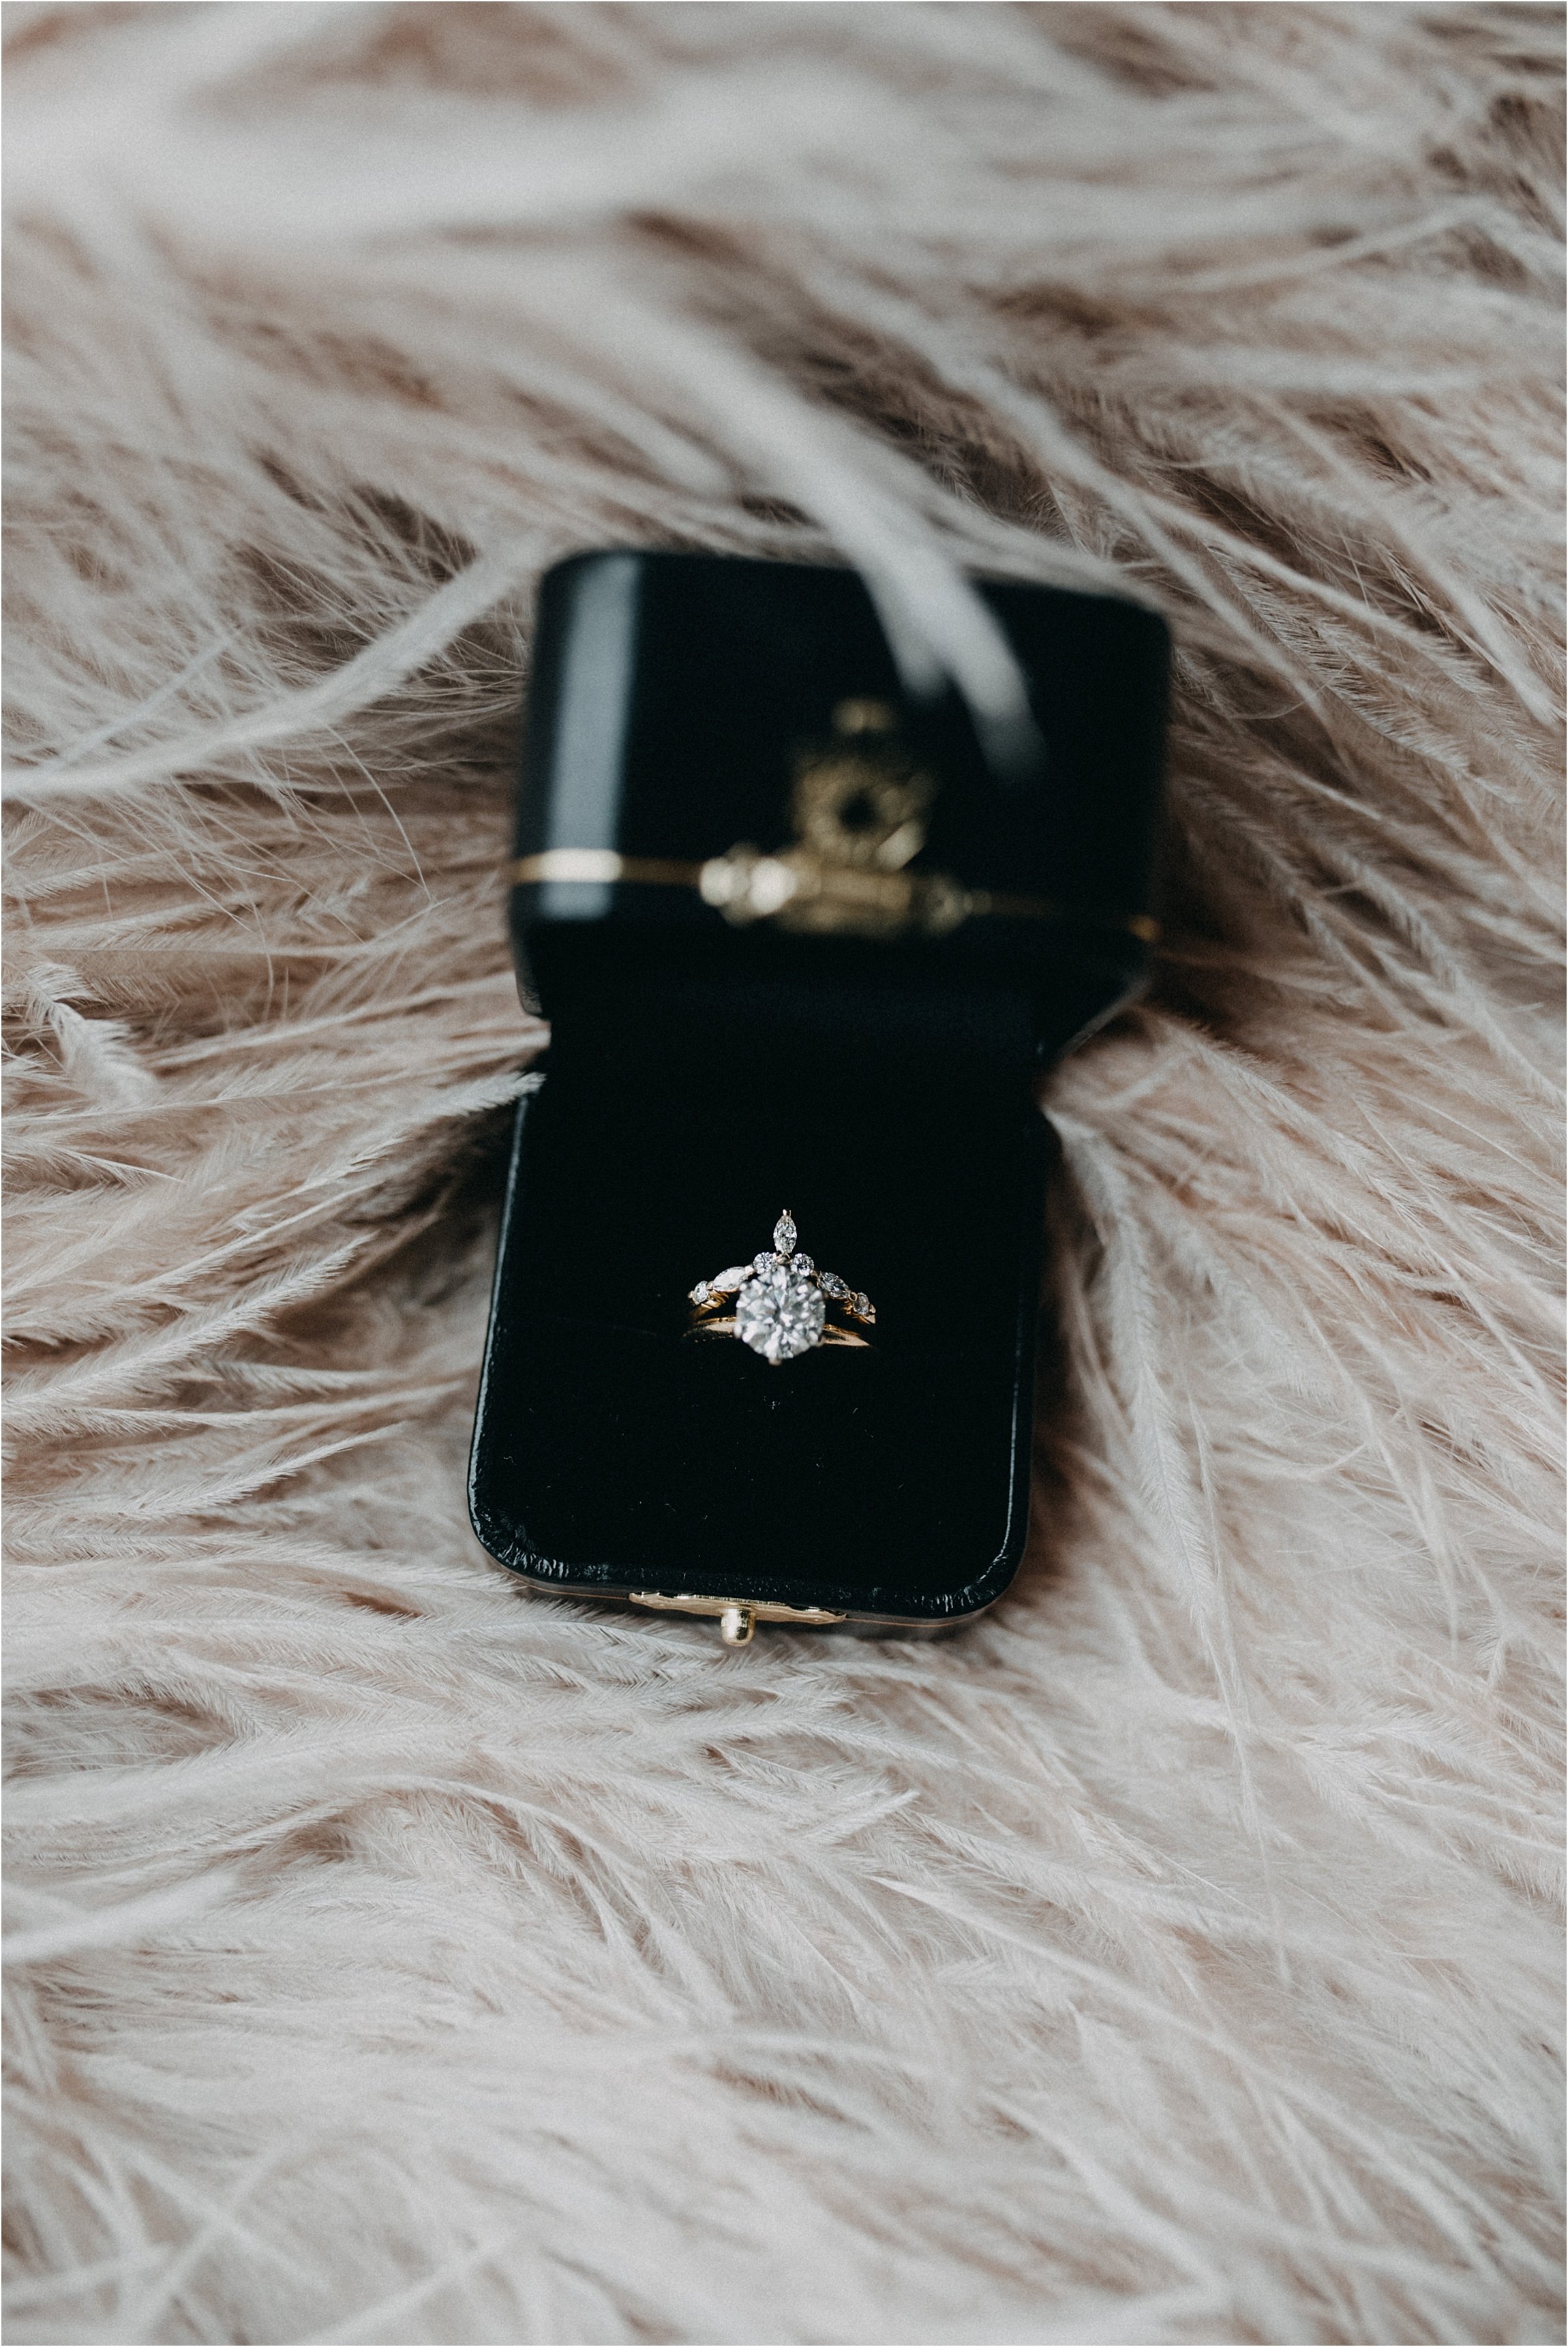  Unique engagement ring and band - Livemore Weddings 